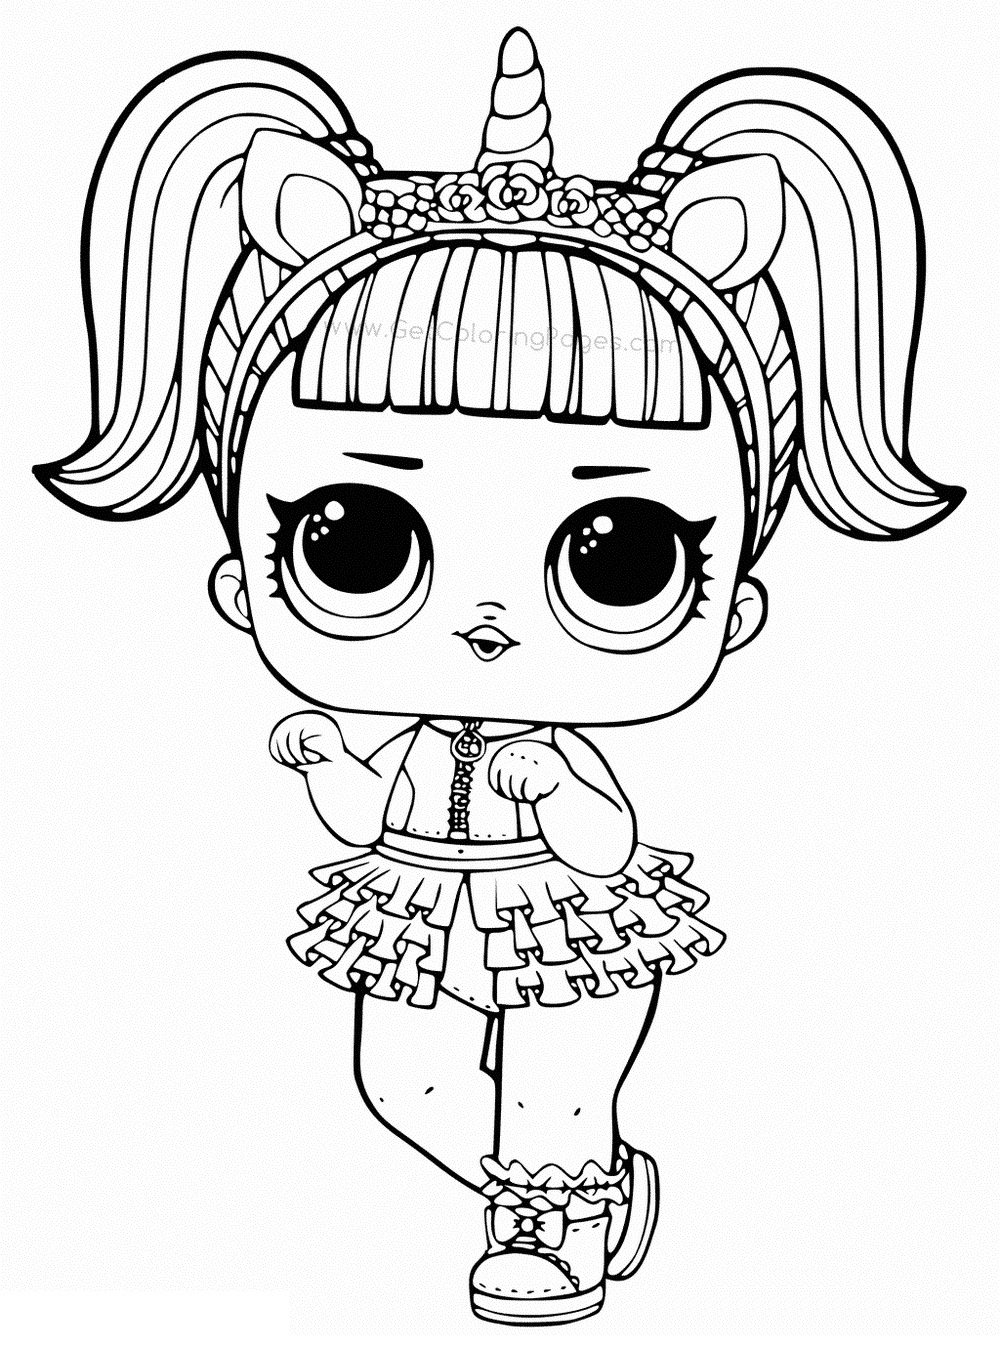 LOL Surprise Dolls Coloring Pages. Print Them for Free All the Series